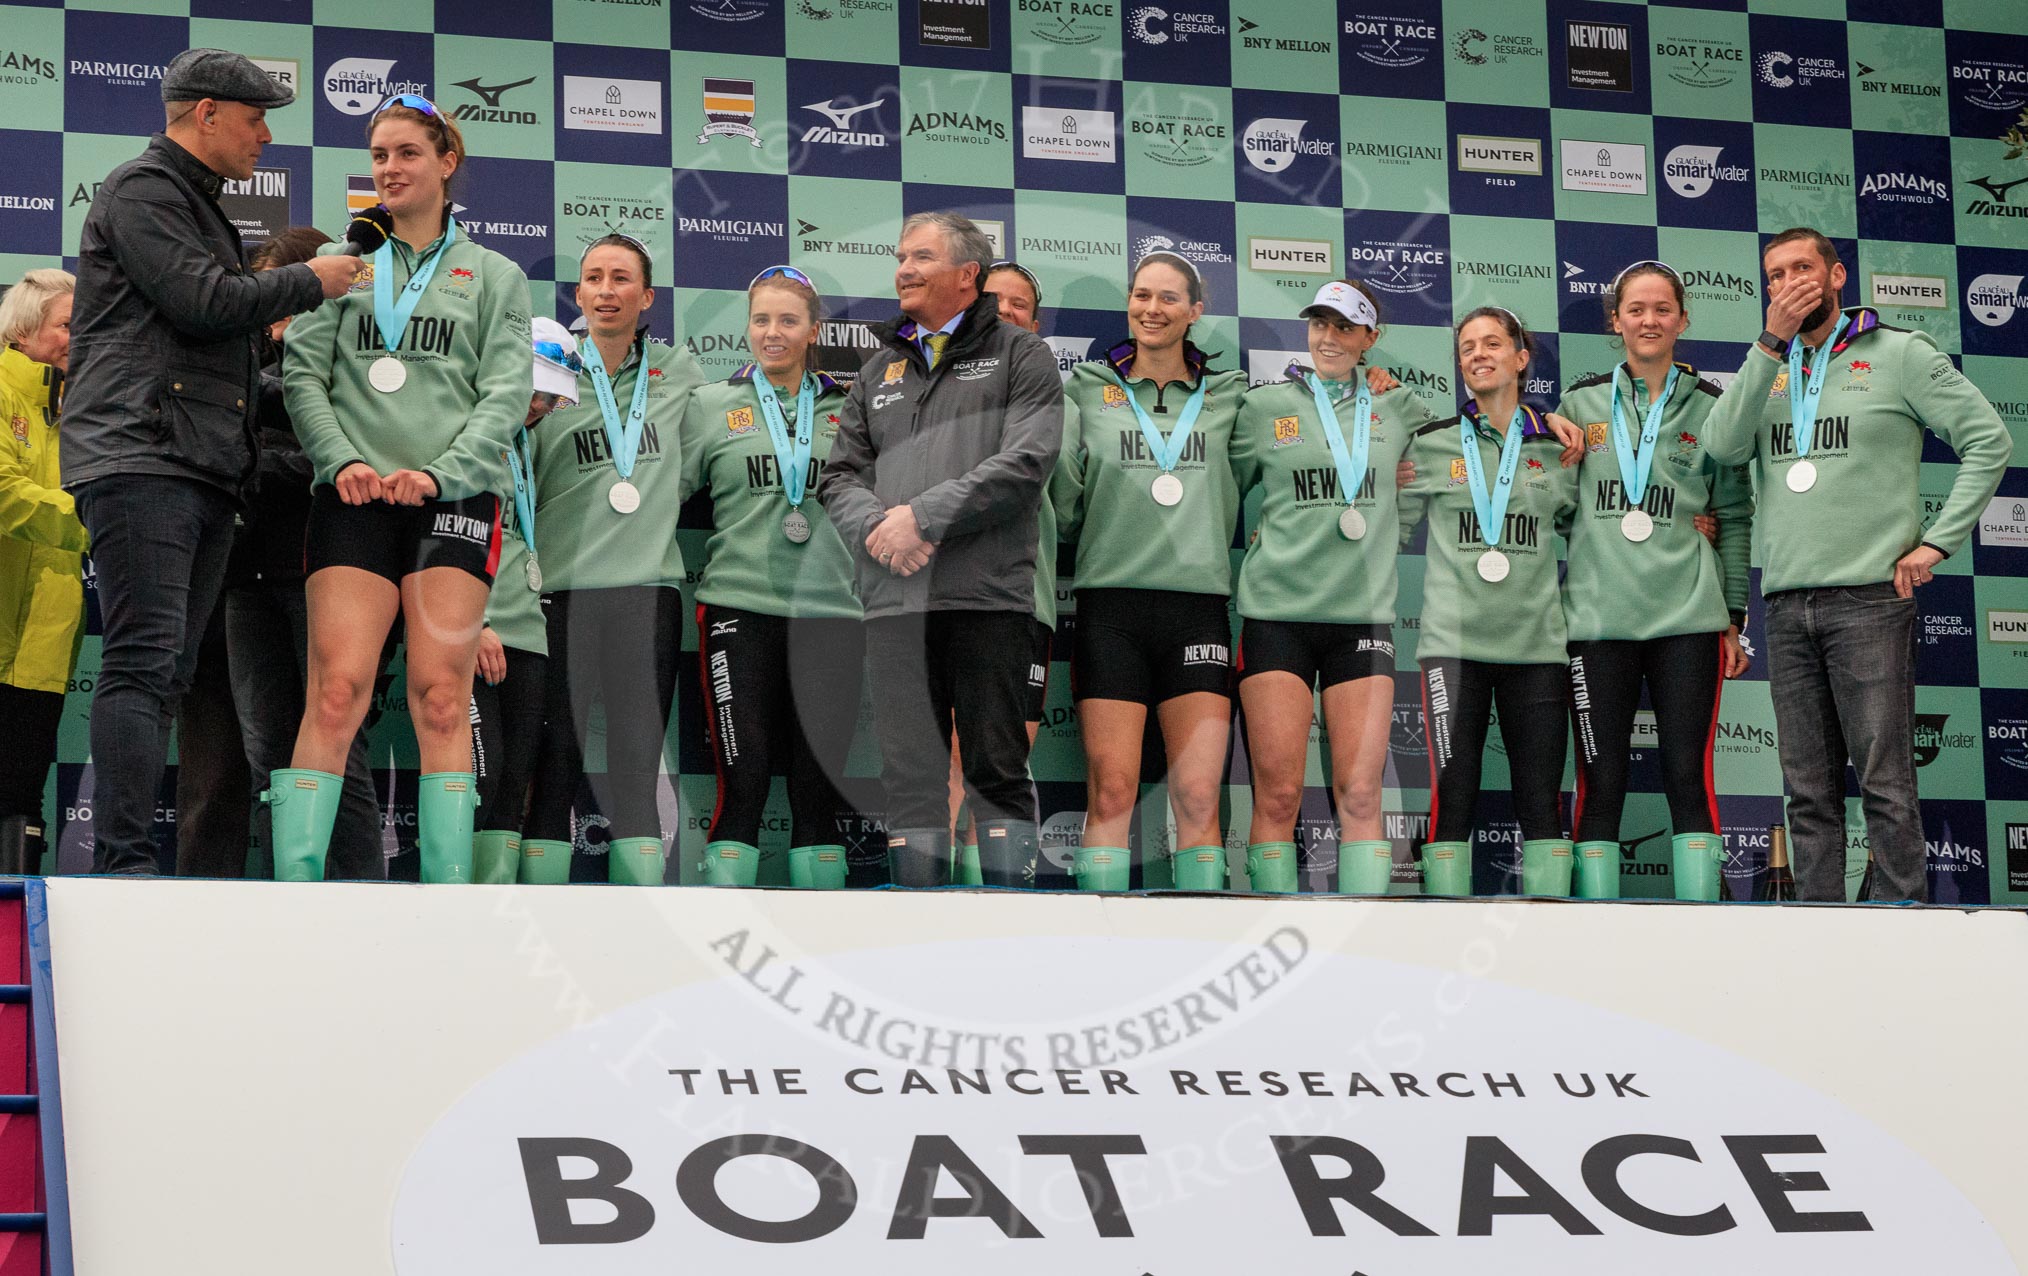 The Cancer Research UK Women's Boat Race 2018: The Women's Boat race trophy presentation - BBC Sport commentator Jason Mohammad, Myriam Goudet-Boukhatmi, Sophie Shapter, Olivia Coffey, Alice White, Boat Race Company director Fergus Murison, behind him Paula Wesselmann, then Thea Zabell, Kelsey Barolak, Imogen Grant, Tricia Smith, and CUWBC Head Coach Rob Baker.
River Thames between Putney Bridge and Mortlake,
London SW15,

United Kingdom,
on 24 March 2018 at 17:08, image #269